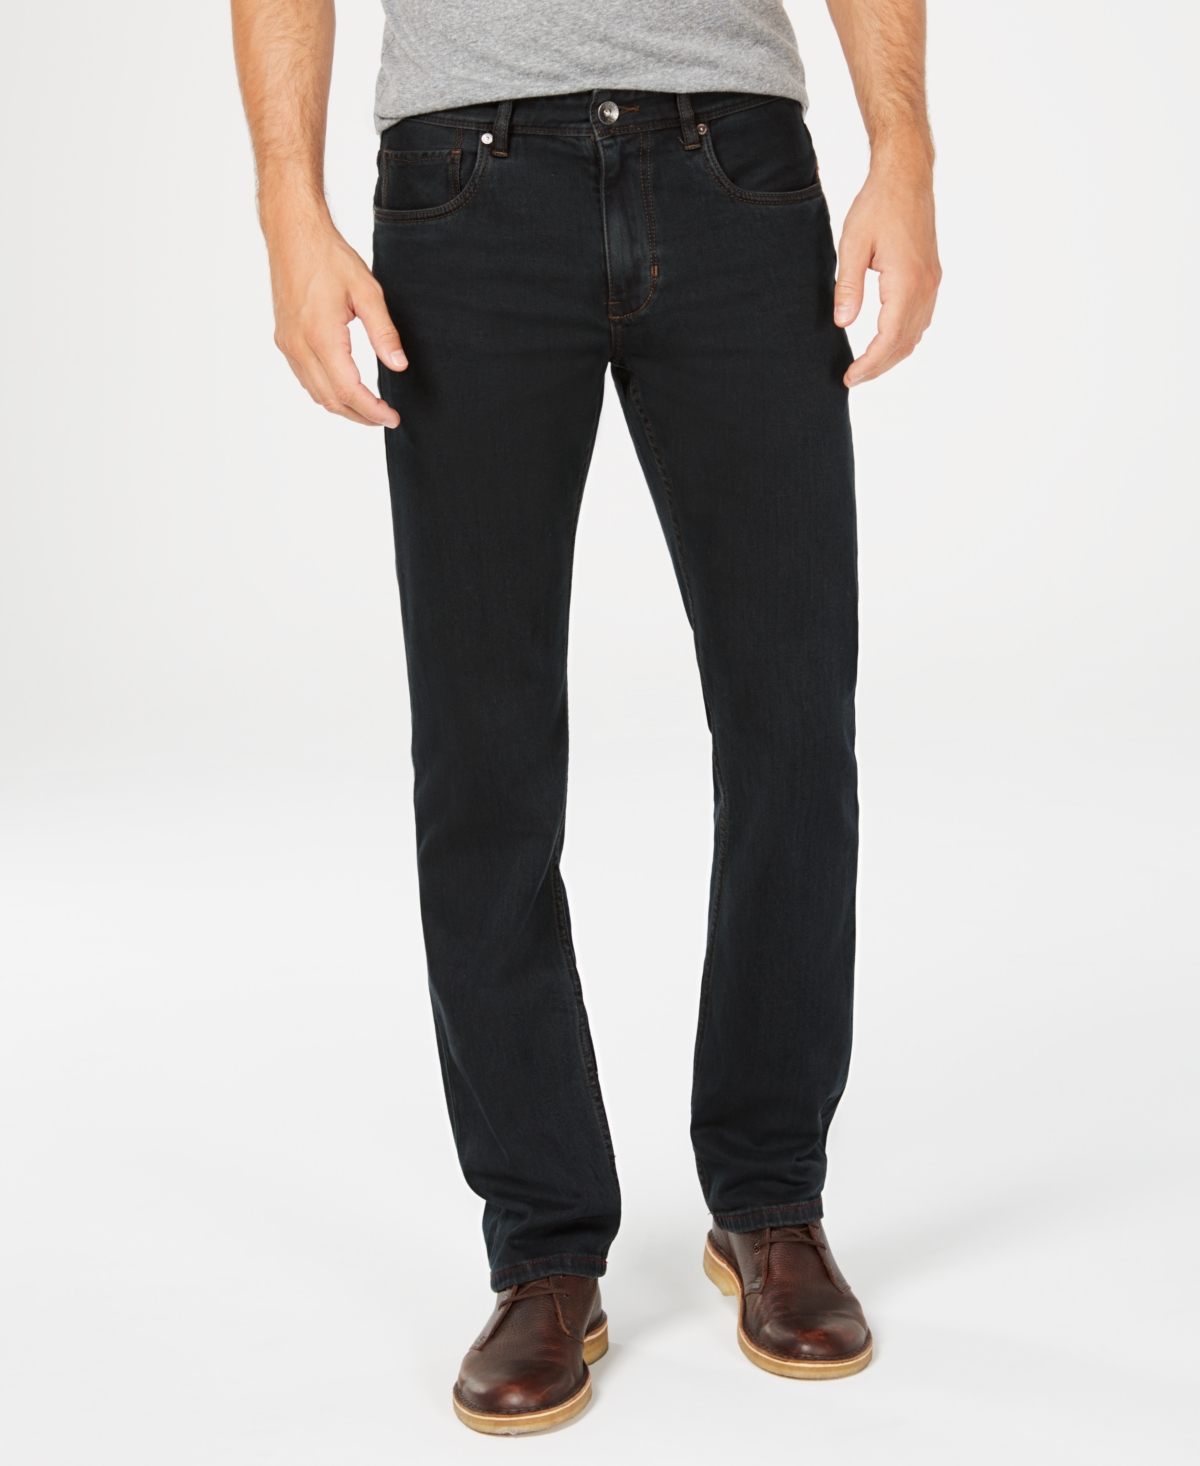 UPC 719260422469 product image for Tommy Bahama Men's Antigua Cove Authentic Fit Jeans | upcitemdb.com